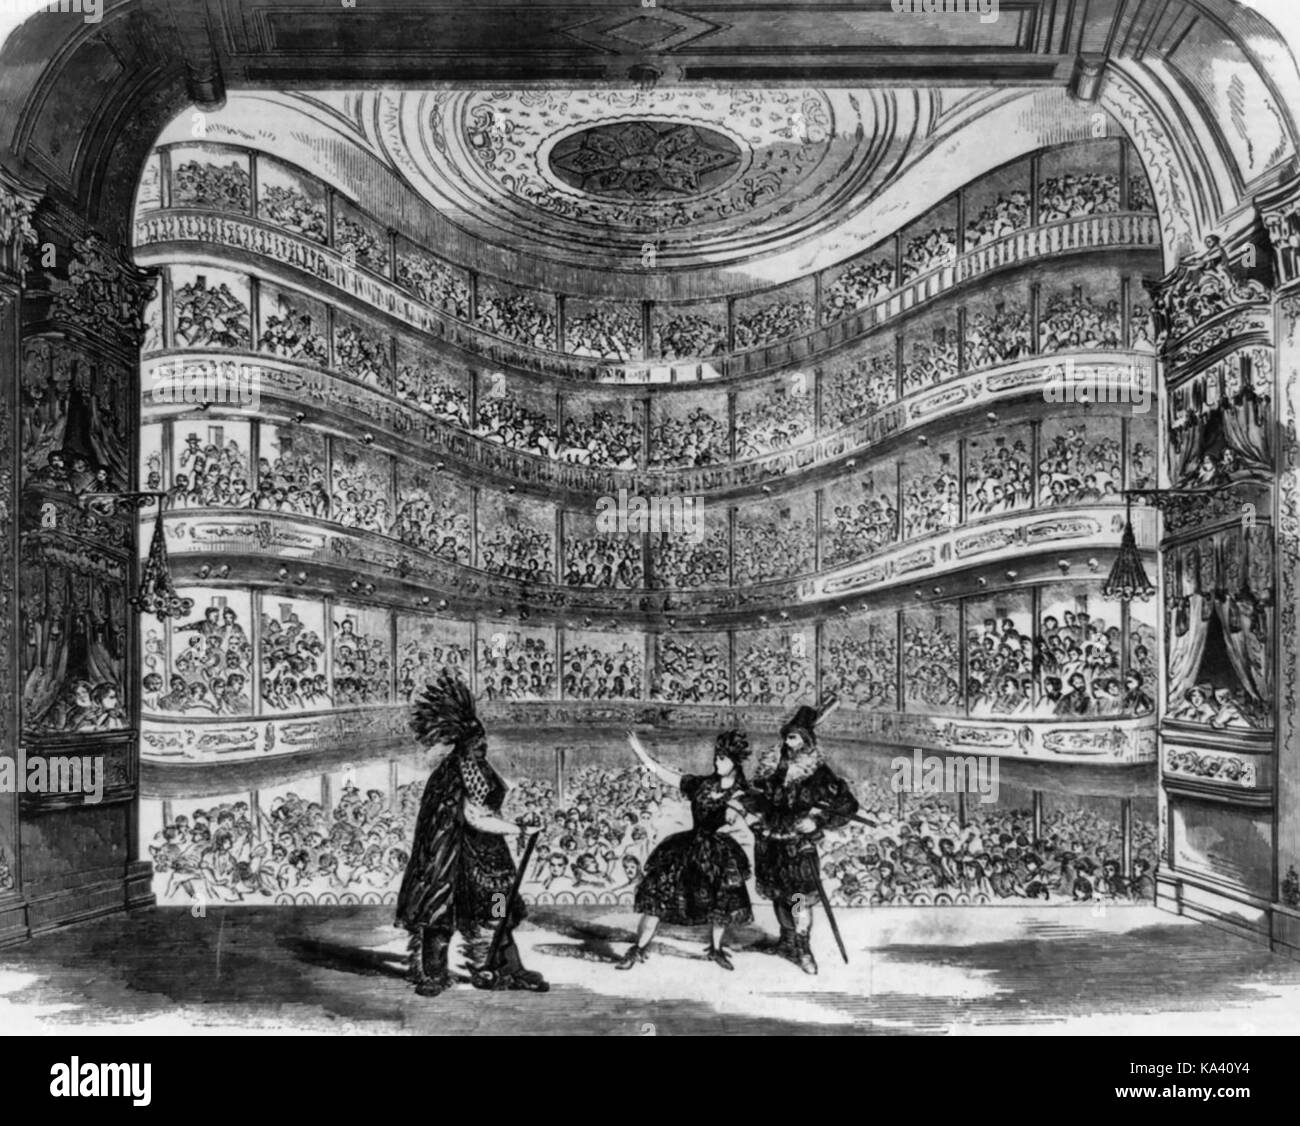 Interior view of the Bowery Theatre, New York (as rebuilt in 1845 by John M. Trimble), published in the 1856 Stock Photo